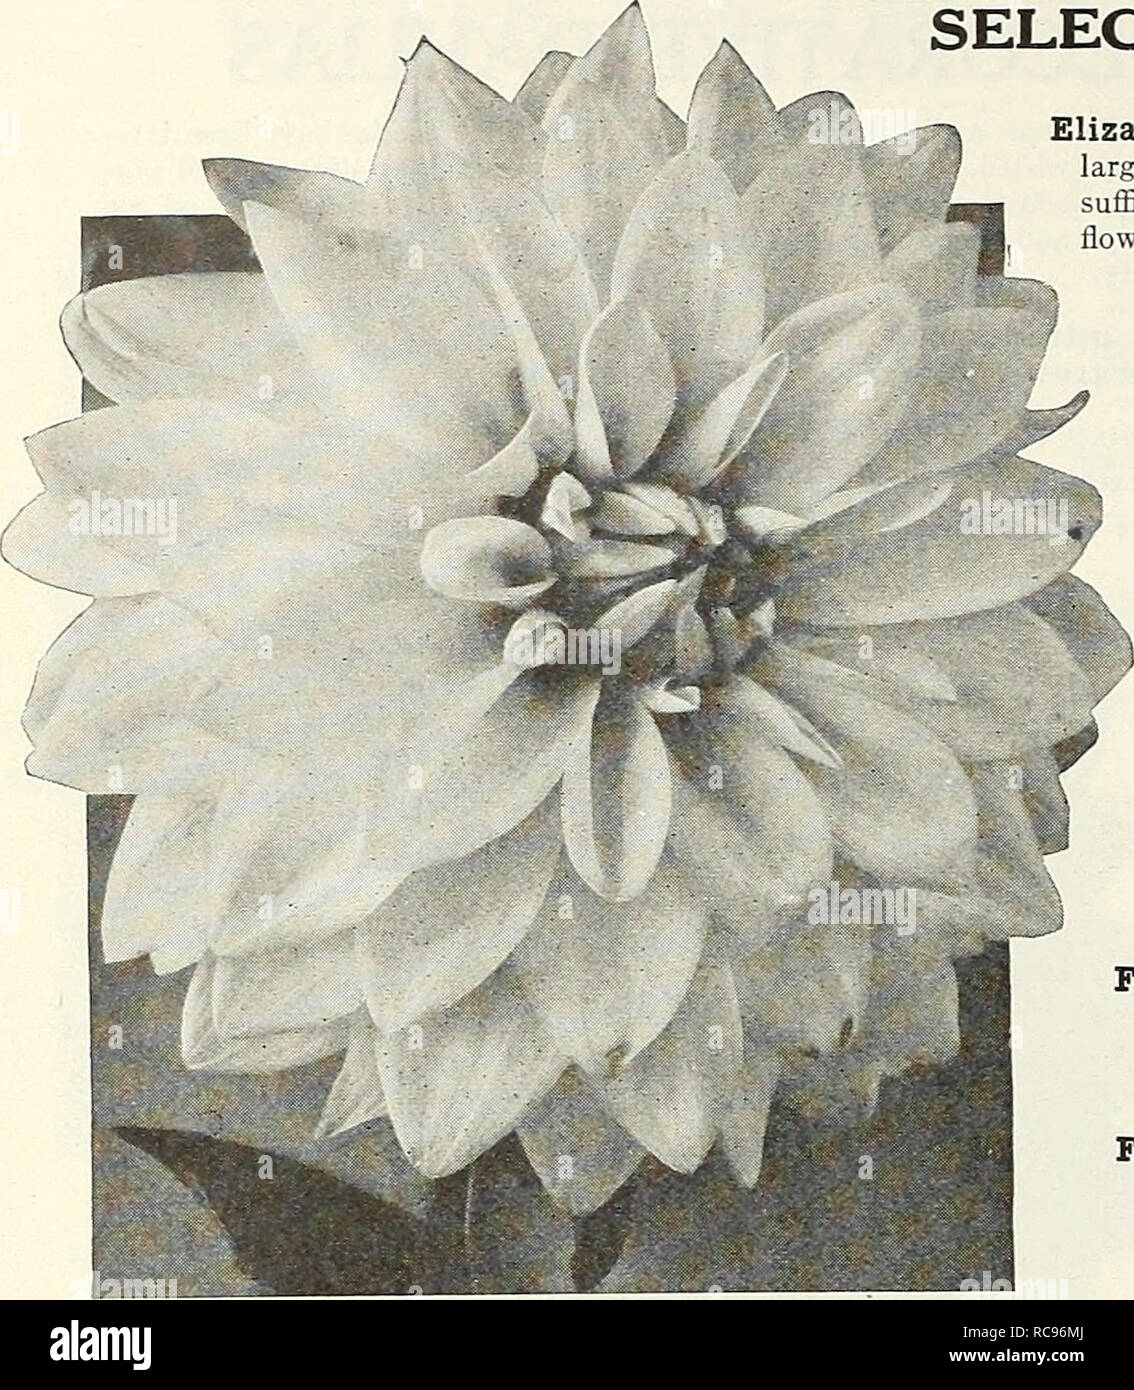 . Dreer's garden book 1926. Seeds Catalogs; Nursery stock Catalogs; Gardening Equipment and supplies Catalogs; Flowers Seeds Catalogs; Vegetables Seeds Catalogs; Fruit Seeds Catalogs. 148 (flEmyAJKEE^ .gardens™ GREENHOUSE pLANTA &gt;HlLSIlElPm%. Decorative Dahlia, Duchesse de Vendome Dolly Varden. One of the earliest and freest flowering varieties with wonderfully beautiful good sized flowers. The petals curling and twisting delightfully develop a most graceful and attractive bloom of irregular formation. Its color is also most pleasing, a pretty shade of cameo-pink shading to a creamy- pink c Stock Photo